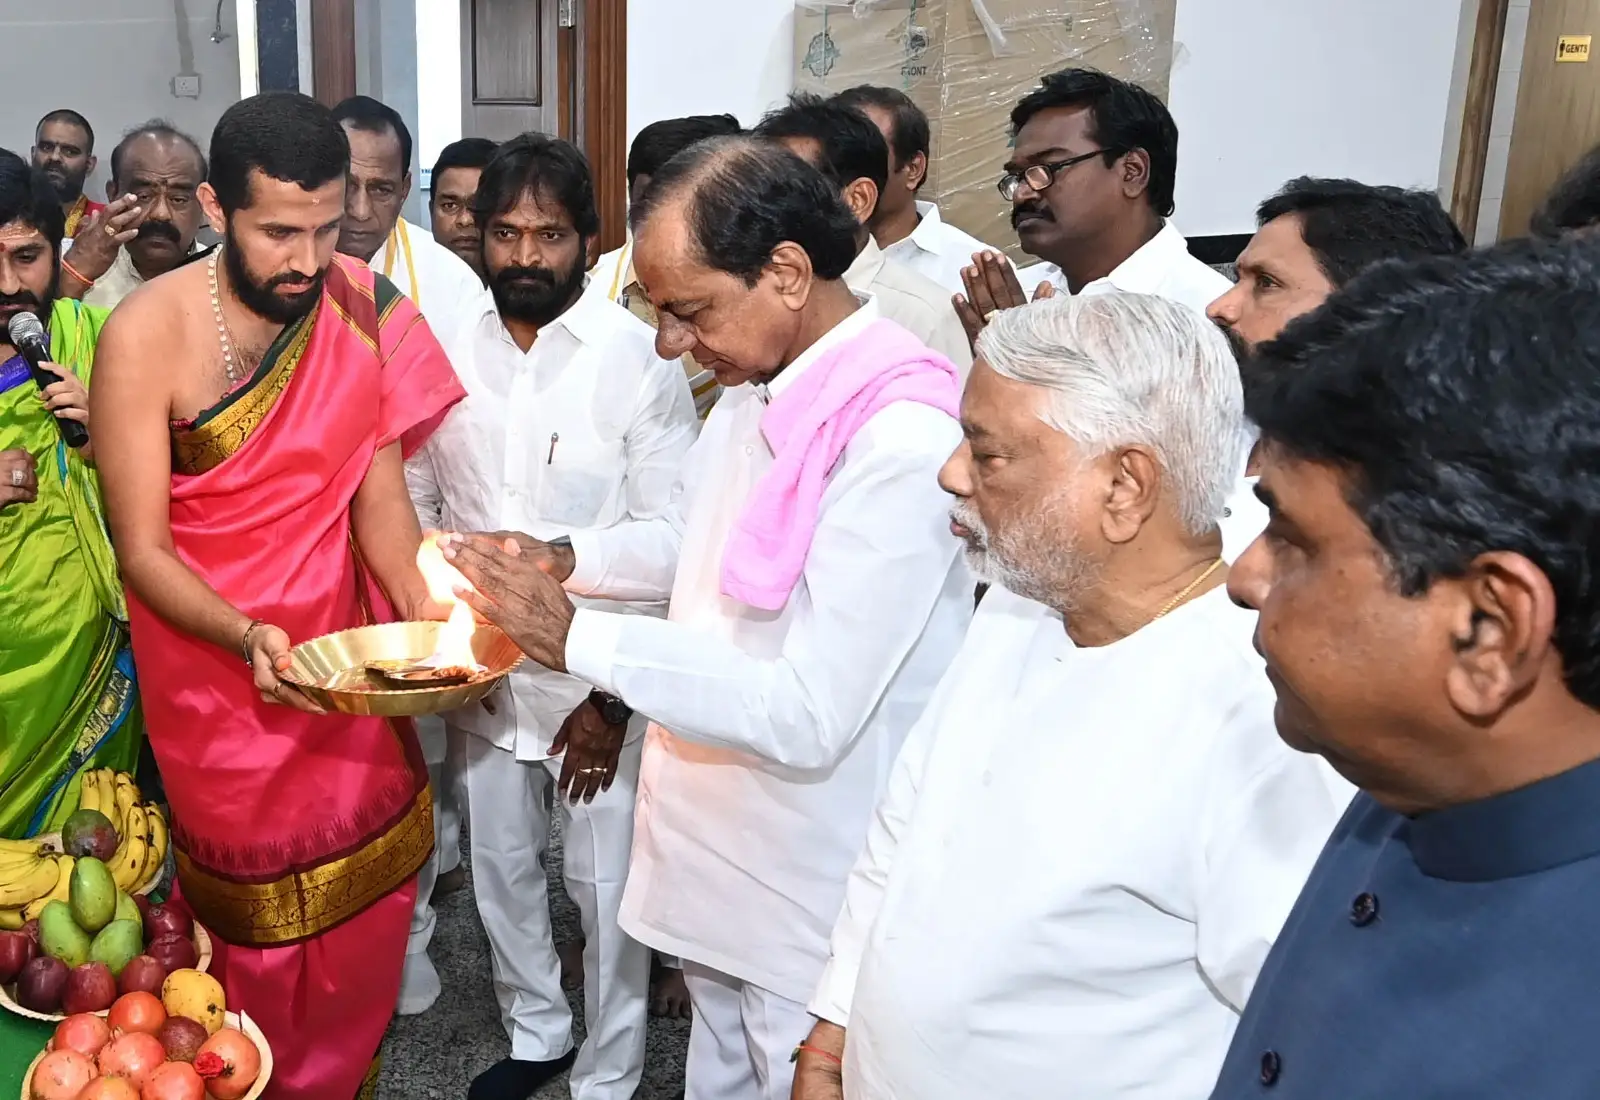 Telangana CM KCR inaugurate BRS central office in Delhi 